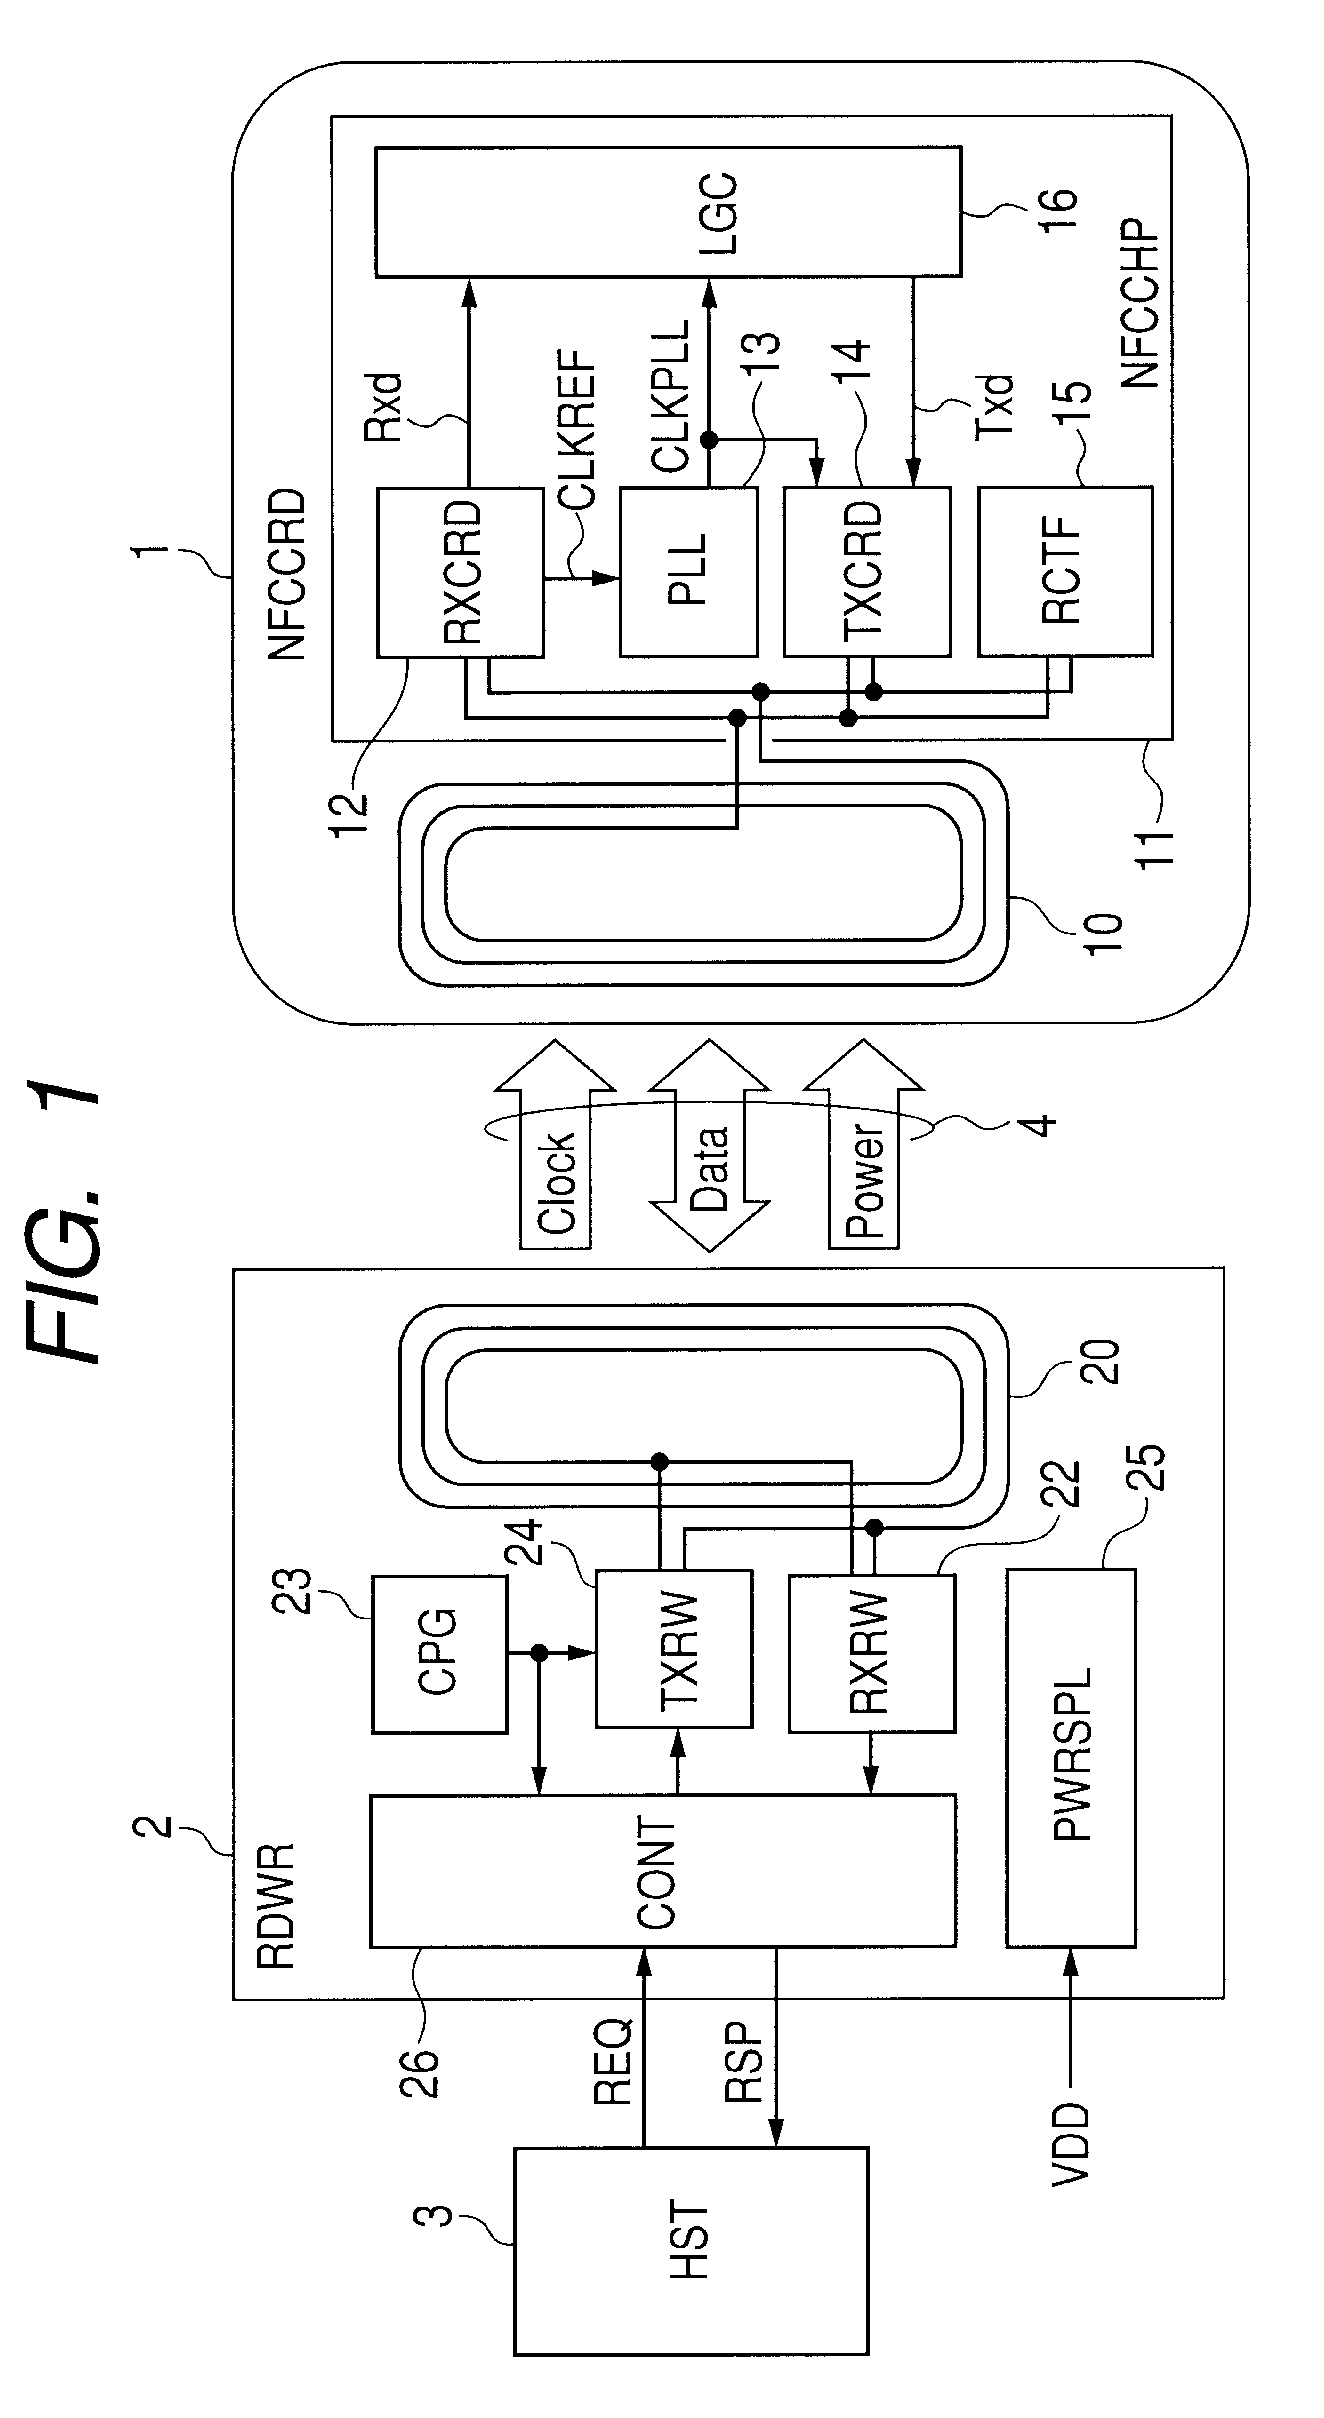 Semiconductor device, portable communication terminal, IC card, and microcomputer